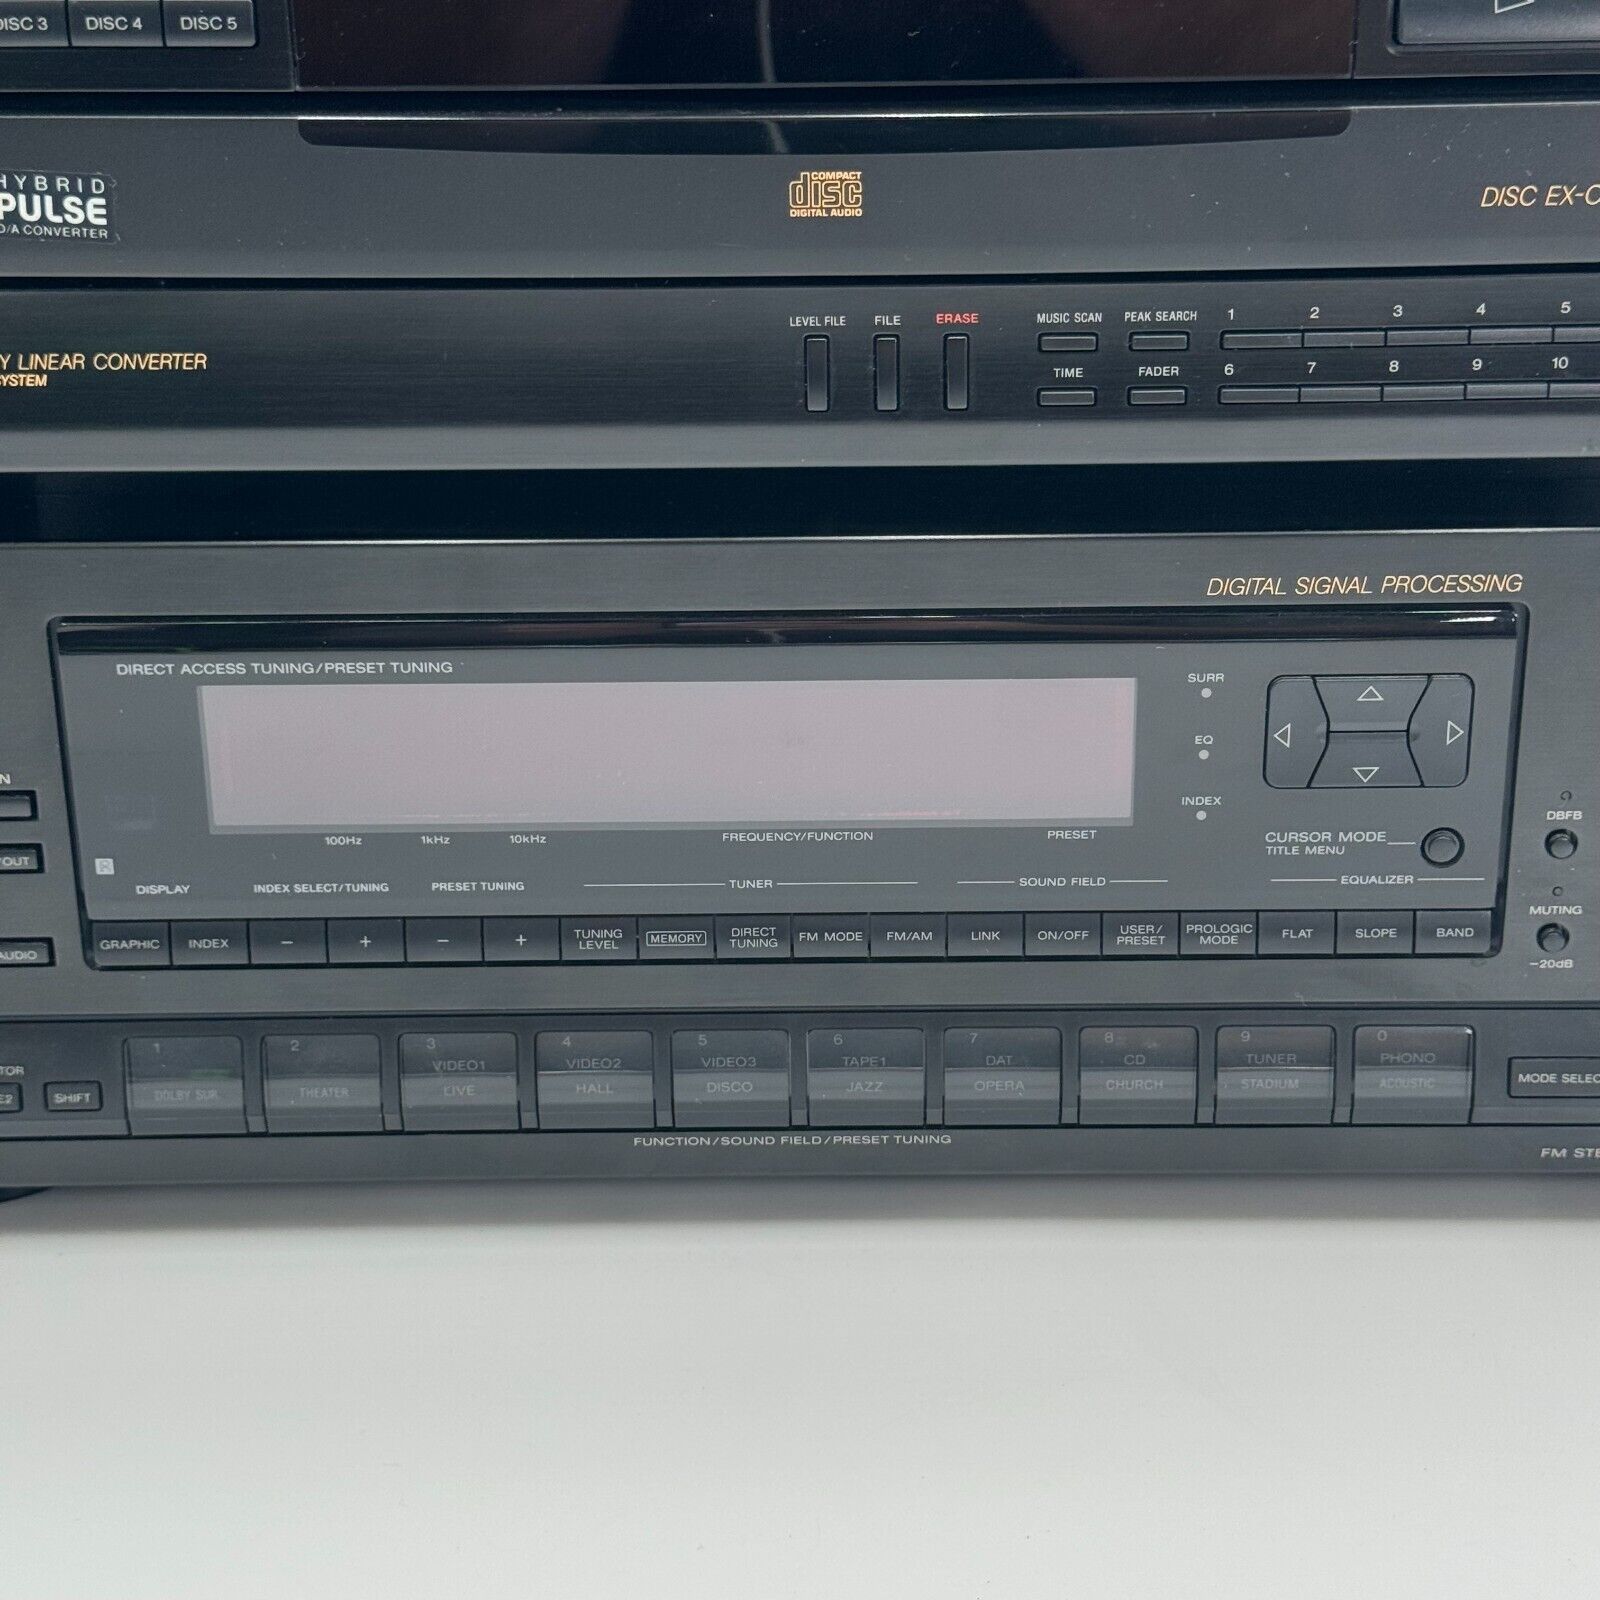 Sony Home Sound System STR-D2090 Stereo Receiver & CDP-C435 5 CD Changer Set